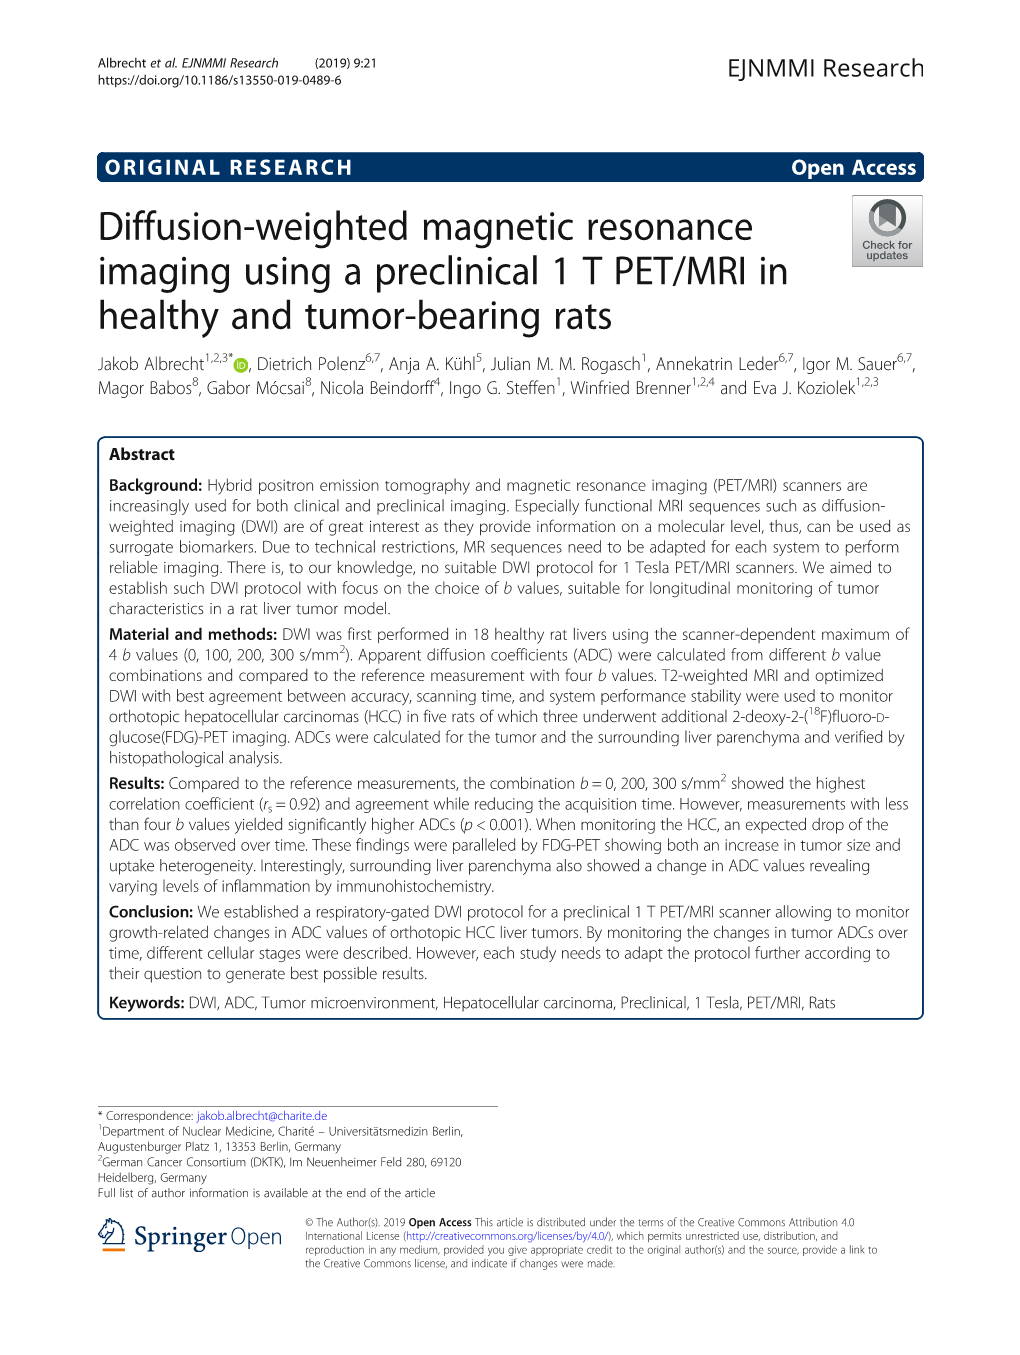 Diffusion-Weighted Magnetic Resonance Imaging Using a Preclinical 1 T PET/MRI in Healthy and Tumor-Bearing Rats Jakob Albrecht1,2,3* , Dietrich Polenz6,7, Anja A